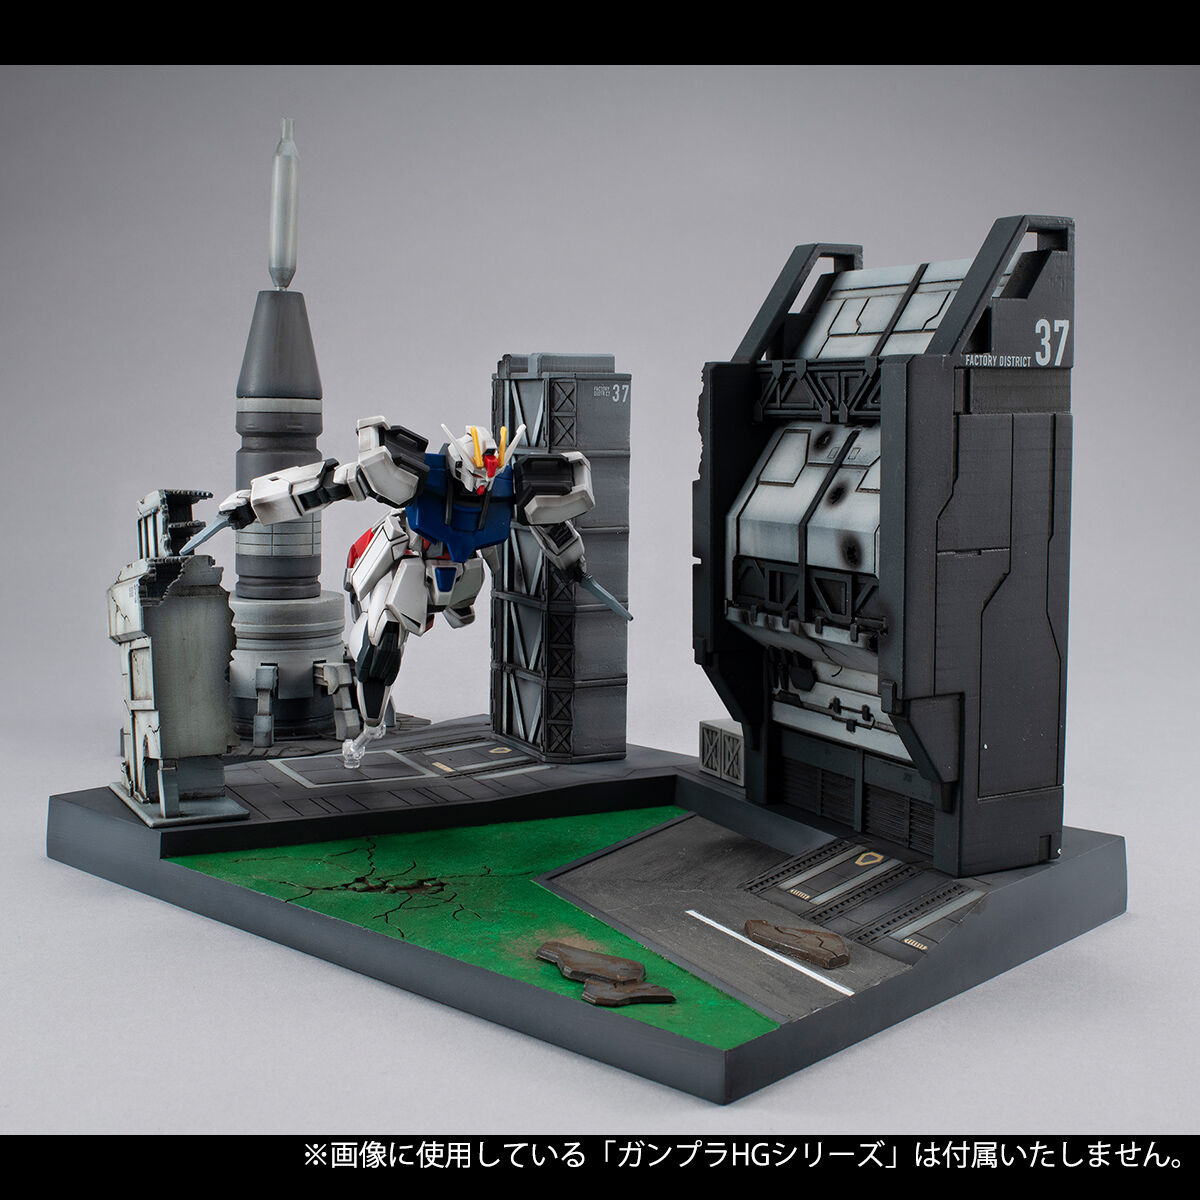 RMS for 1/144 Scale HG Series : G-Structure 06 Heliopolis Battle Stage